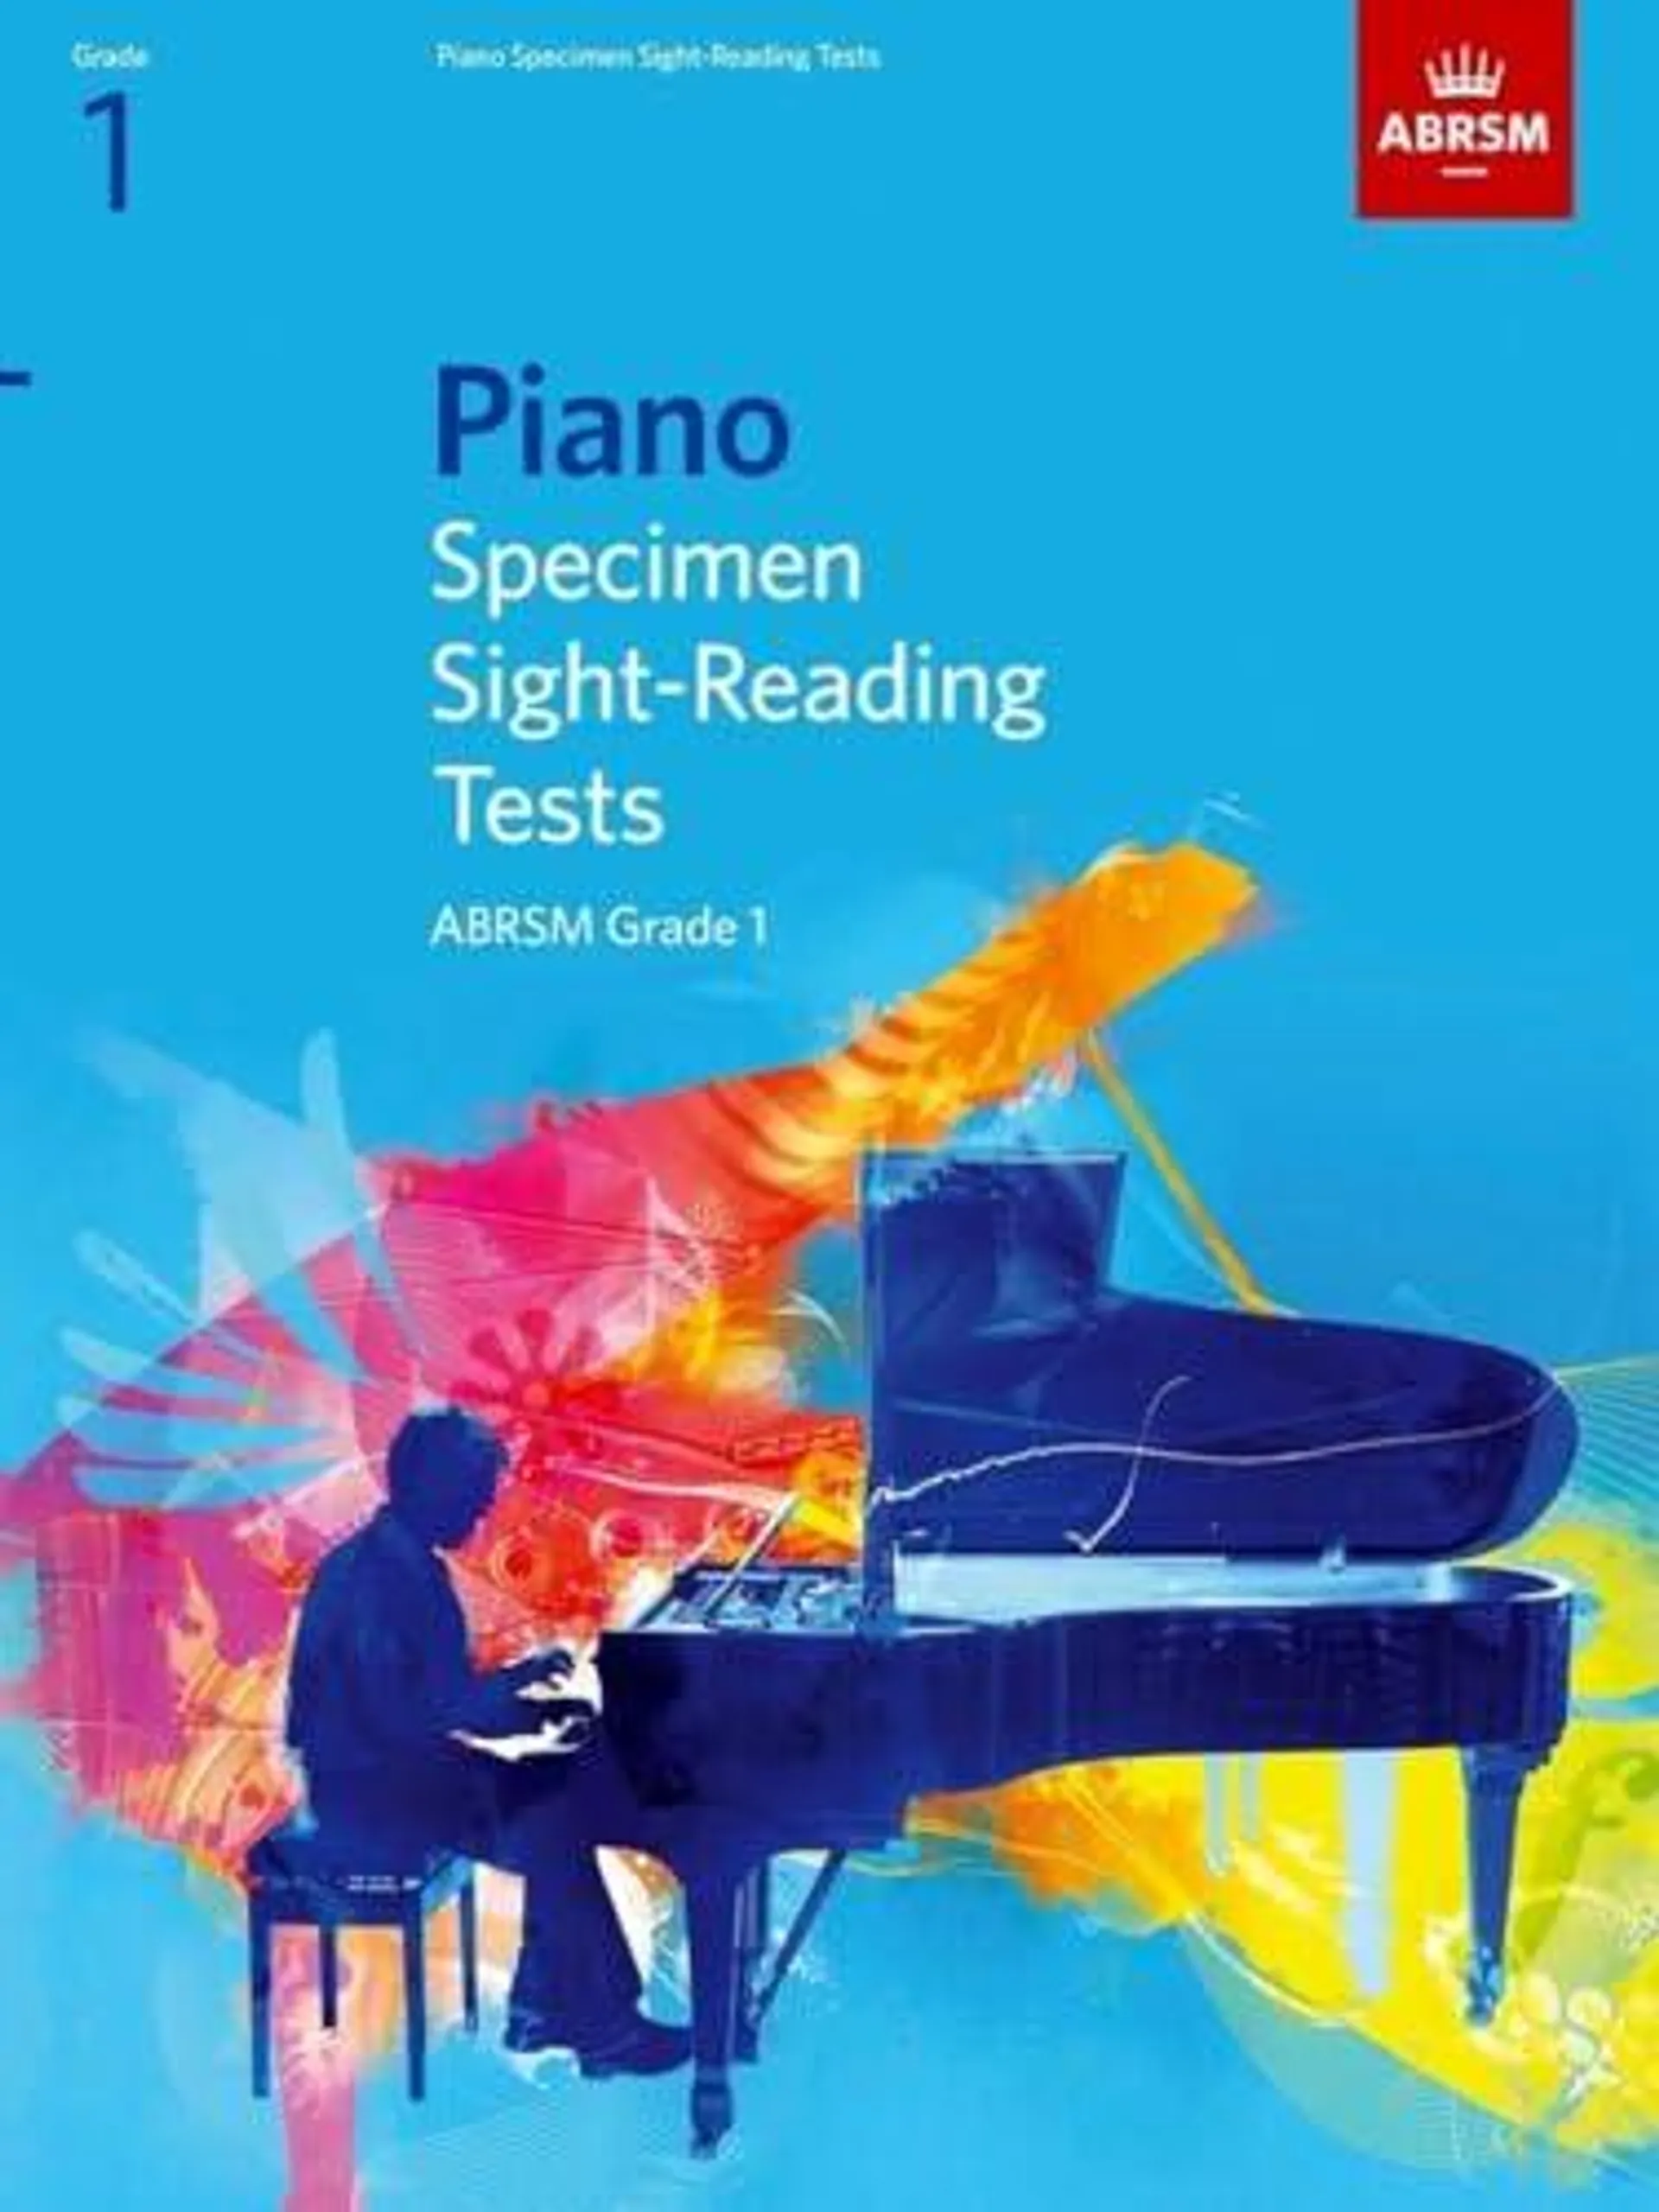 Piano Specimen Sight-Reading Tests, Grade 1 by ABRSM